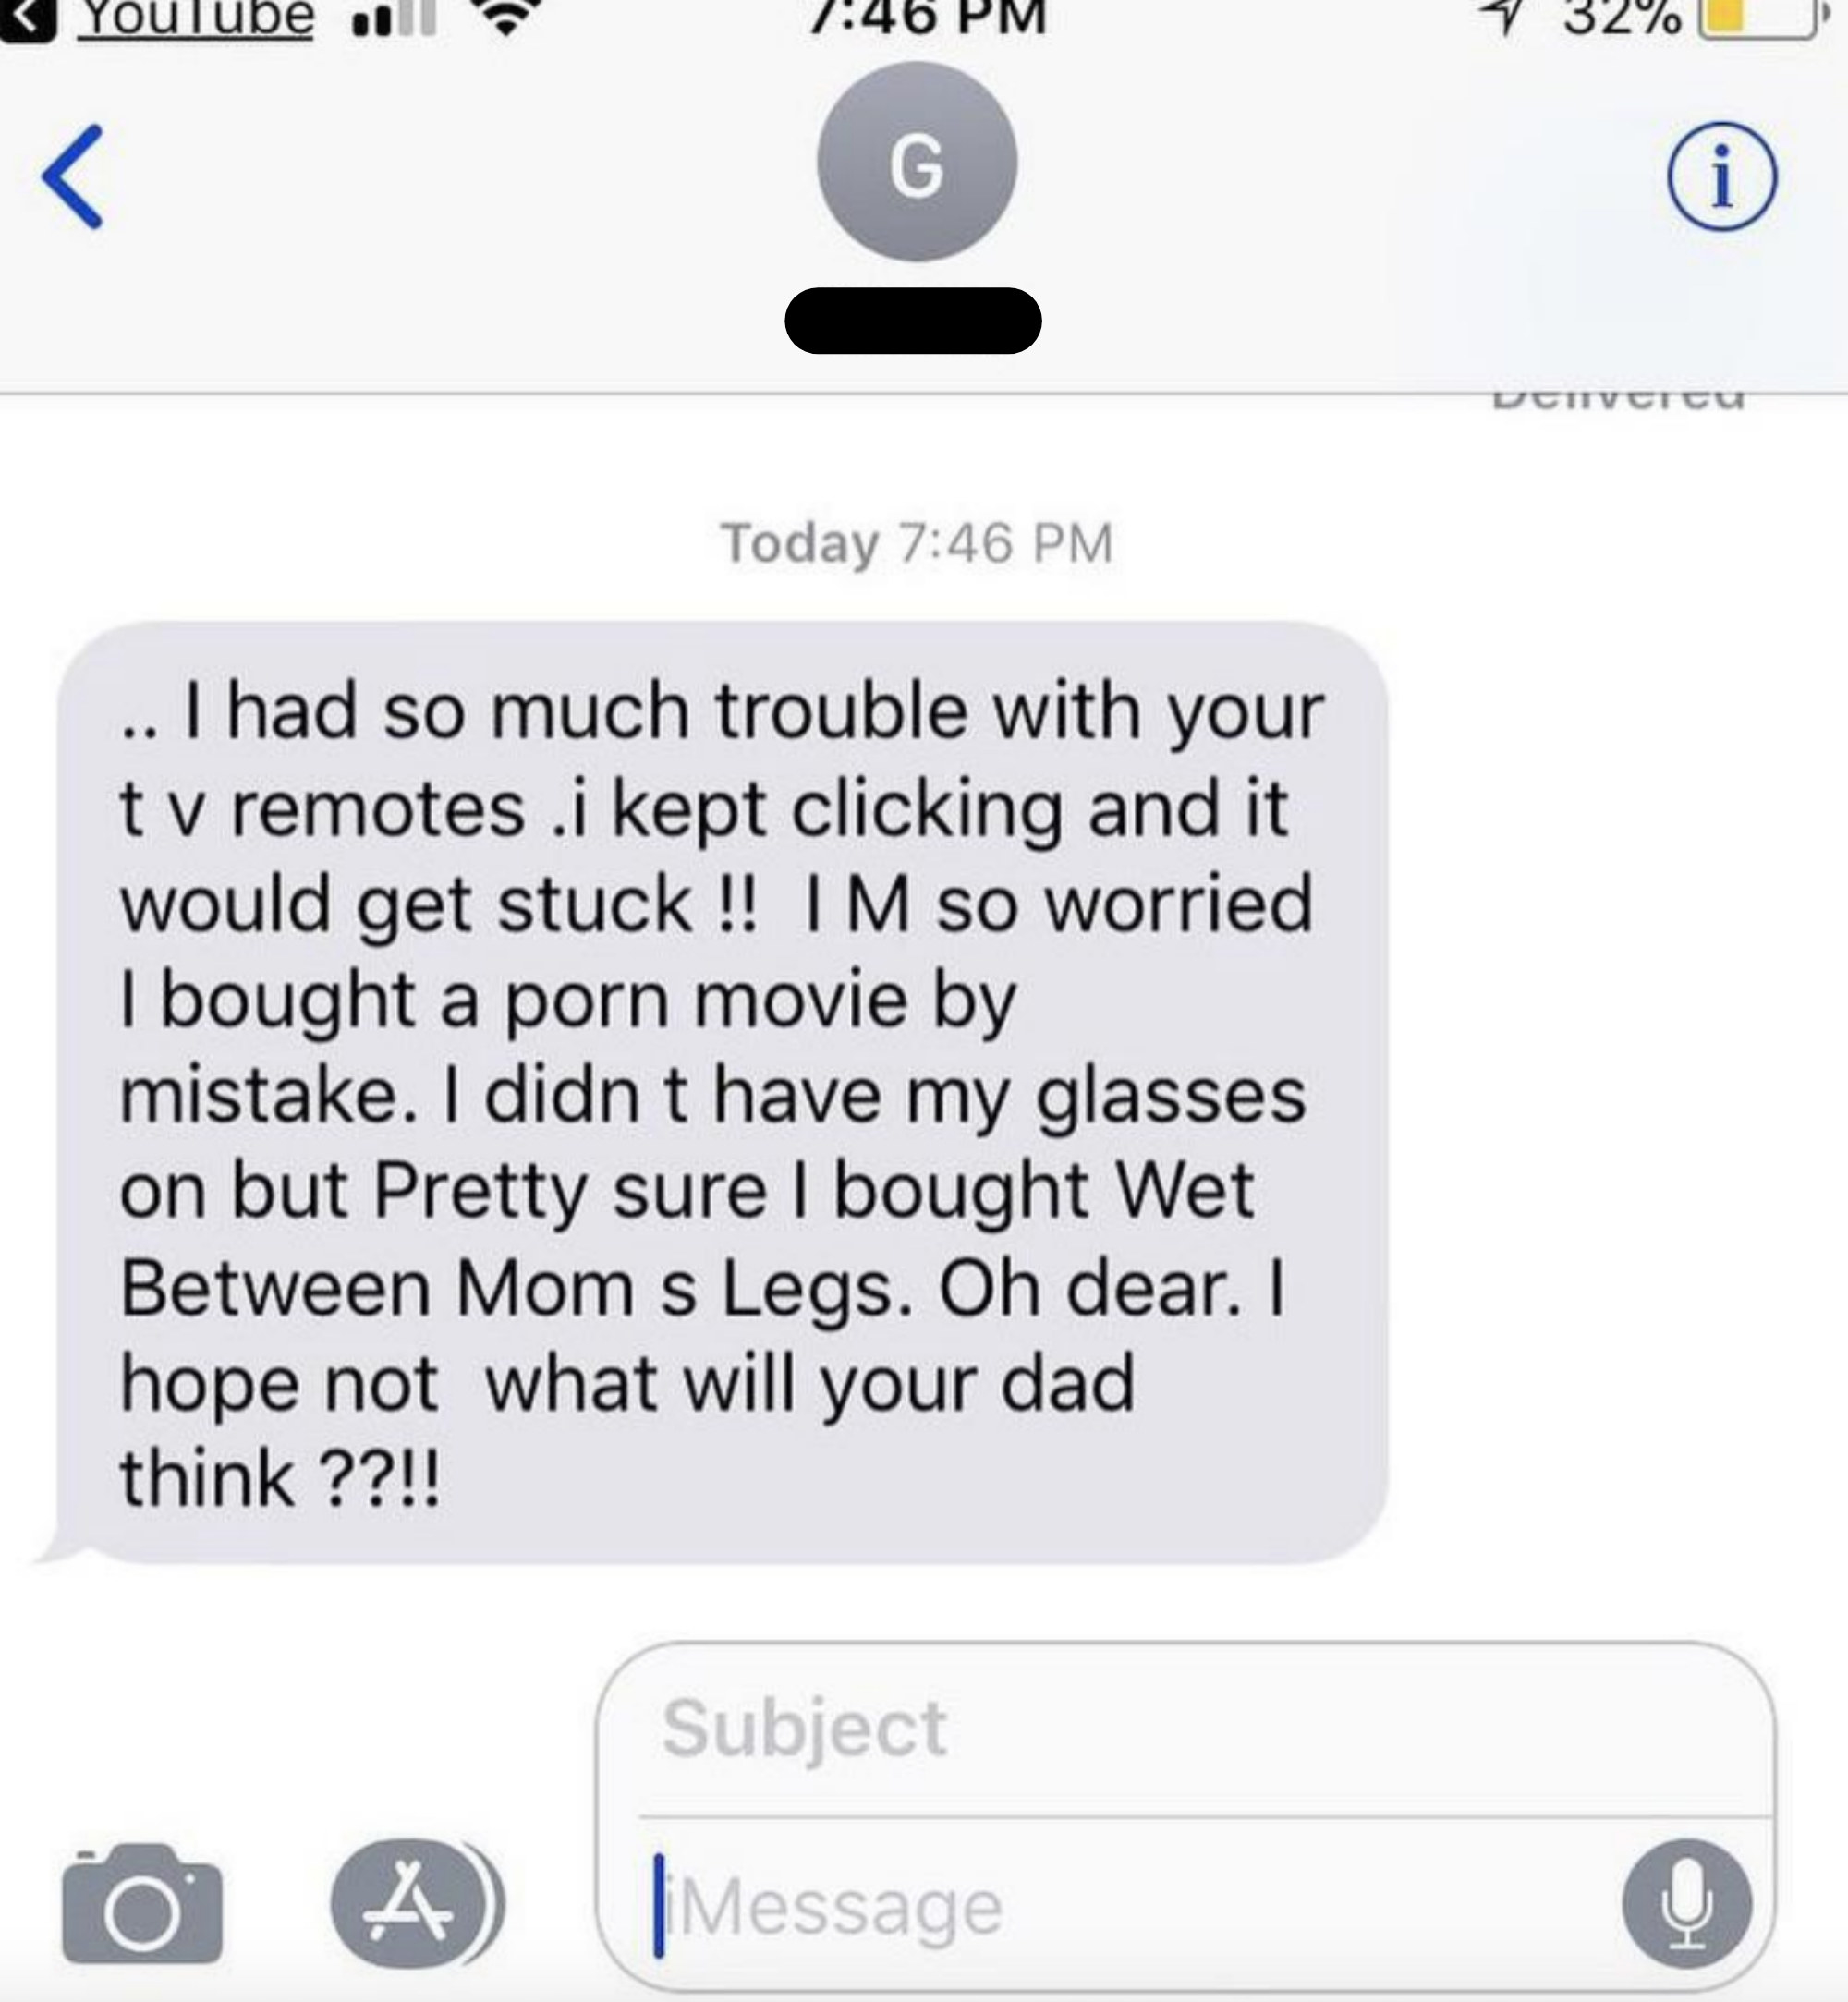 &quot;I have so much trouble with your tv remotes, I kept clicking and it would get stuck!! I&#x27;m so worried I bought a porn movie by mistake; I didn&#x27;t have my glasses on but pretty sure I bought Wet Between Mom&#x27;s Legs oh dear&quot;